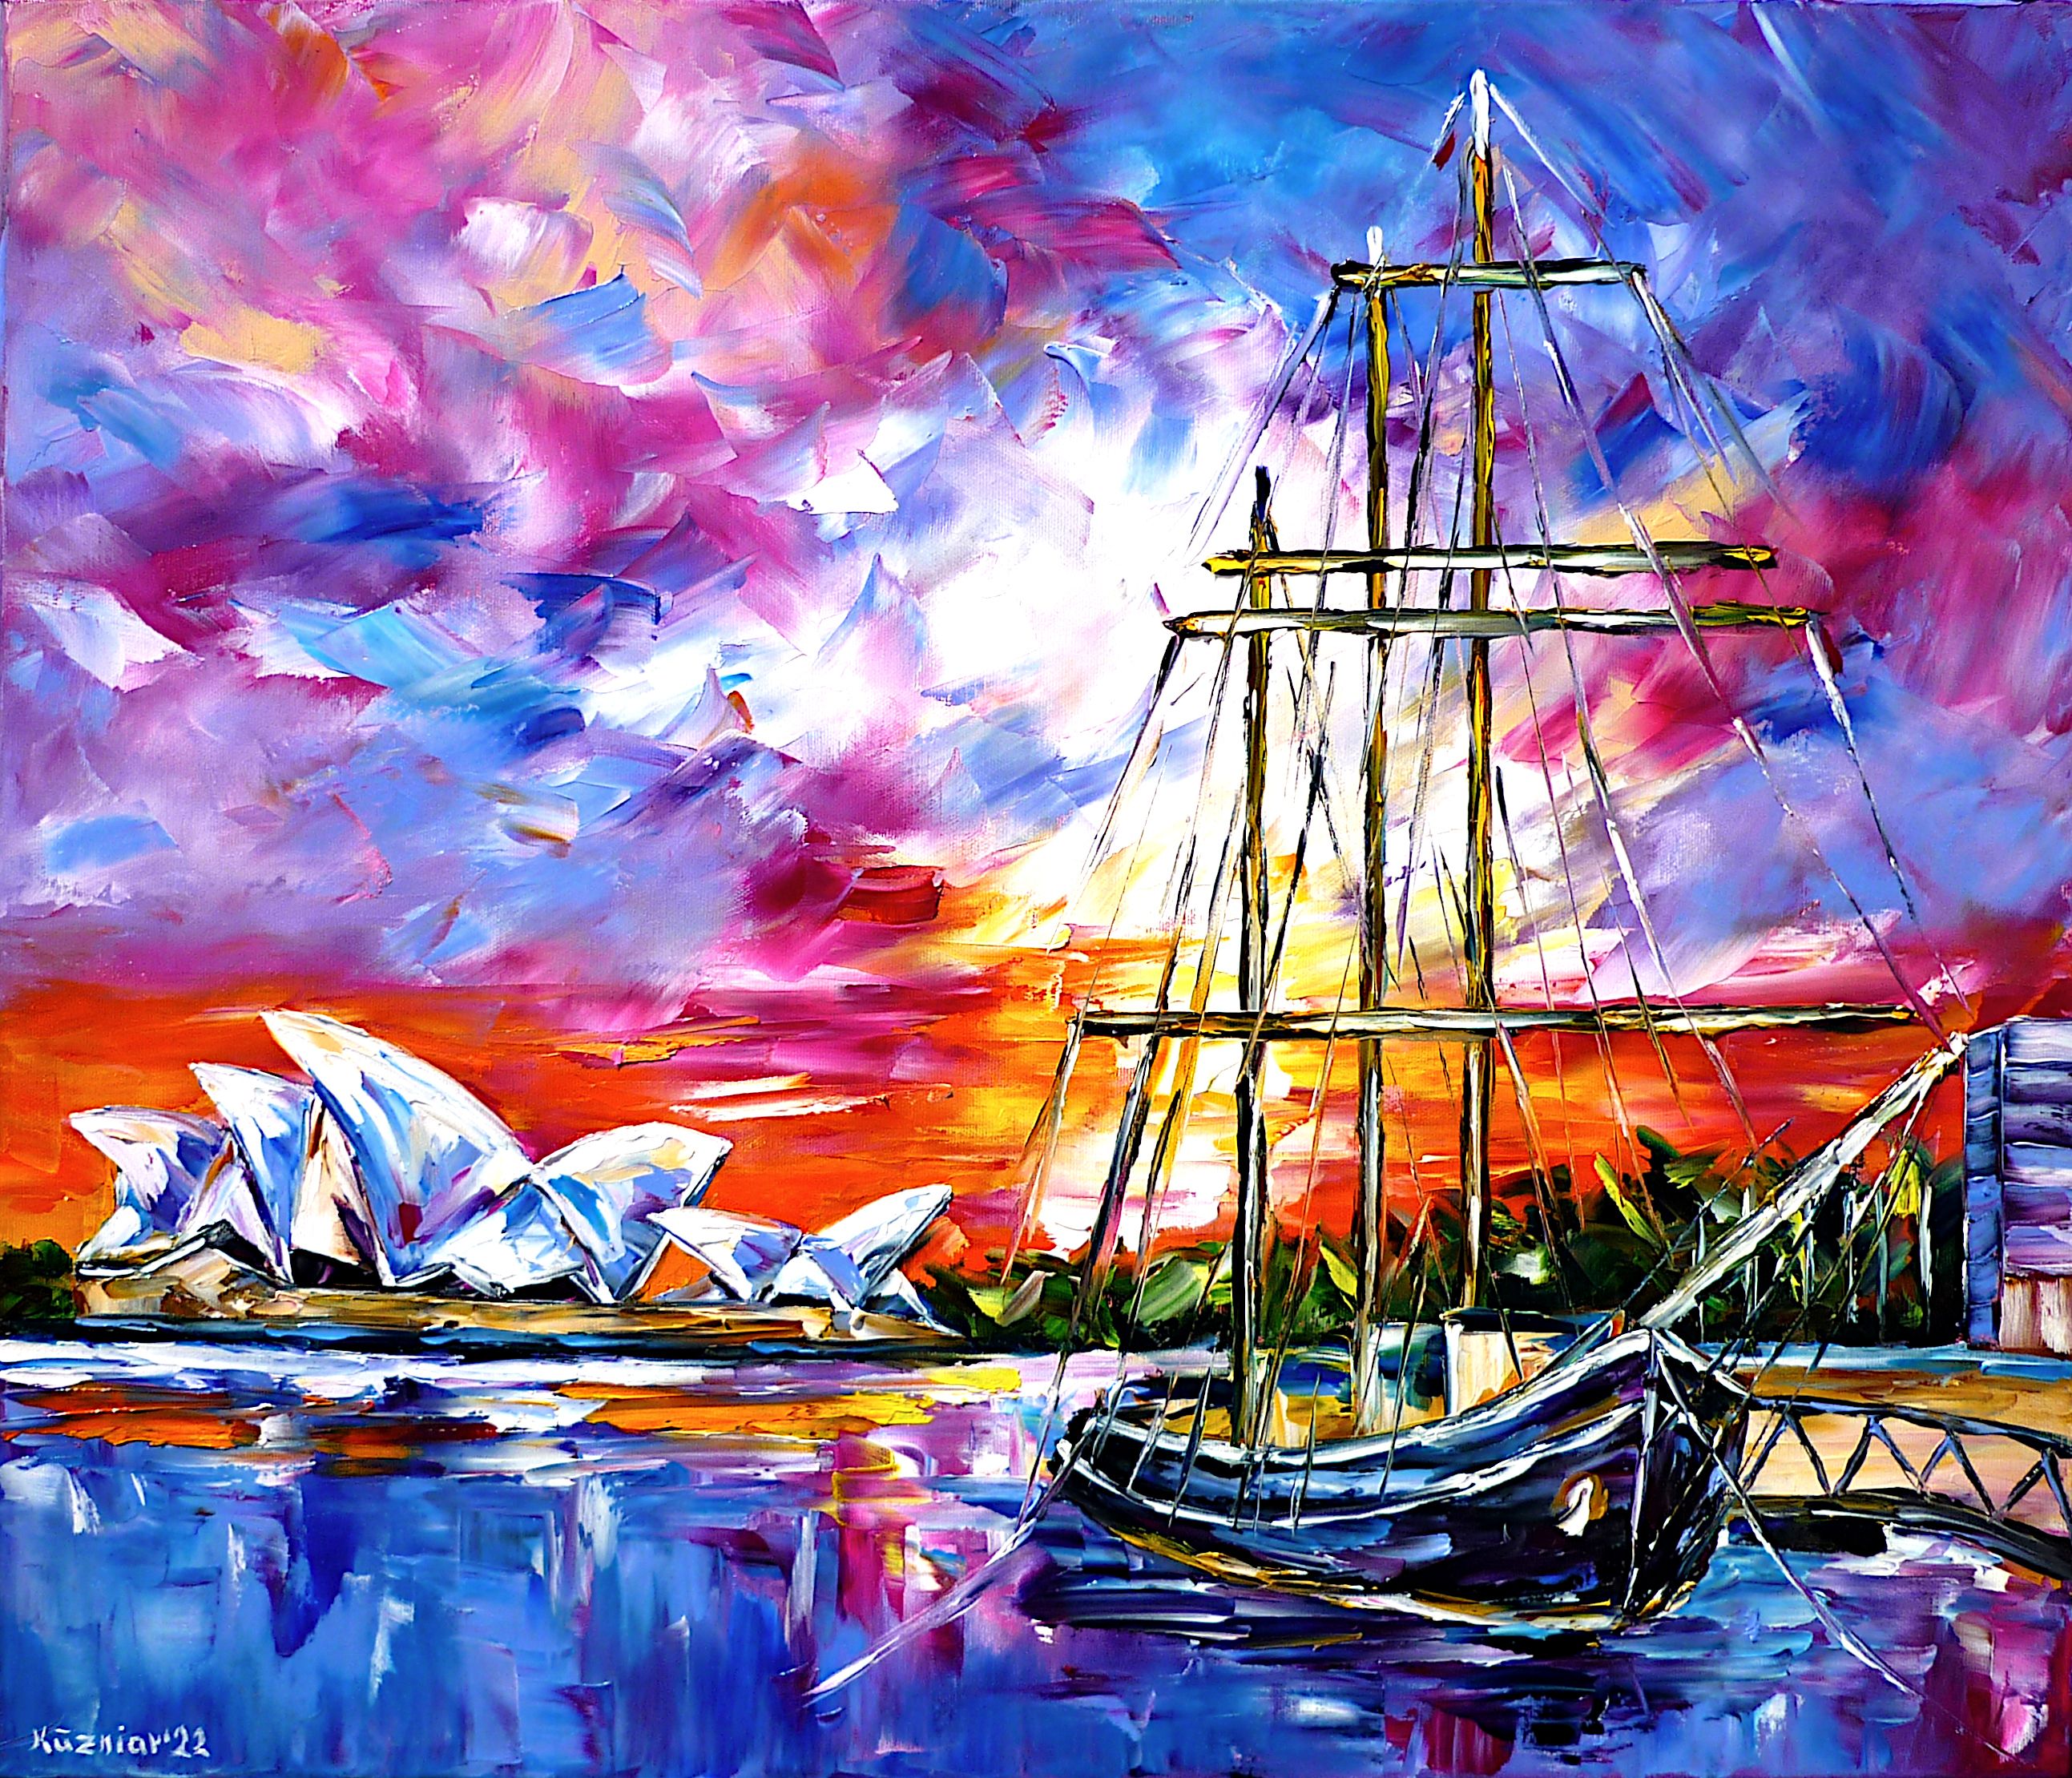 harbor of sydney,port of sydney,harbor in sydney,ship in harbor,harbour scene,harbour picture,harbour painting,harbor at sunset,sydney colorful,at the harbor,harbor in the evening,lively,vibrance,boat in harbor,opera house at sunset,opera house in the evening,red sky,burning sky,sydney opera house,sailing ship,sydney painting,sailing,old ship,sky over sydney,seascape,sydney abstract,sunset at sea,sydney sunset,abstract sky,sydney in the evening,evening light,evening sun,sydney skyline,sydney beauty,sydney love,sydney lover,i love sydney,sailing ship cruise,tall ship,historic sailing ship,palette knife oil painting,modern art,impressionism,expressionism,abstract painting,lively colors,colorful painting,bright colors,light reflections,impasto painting,figurative